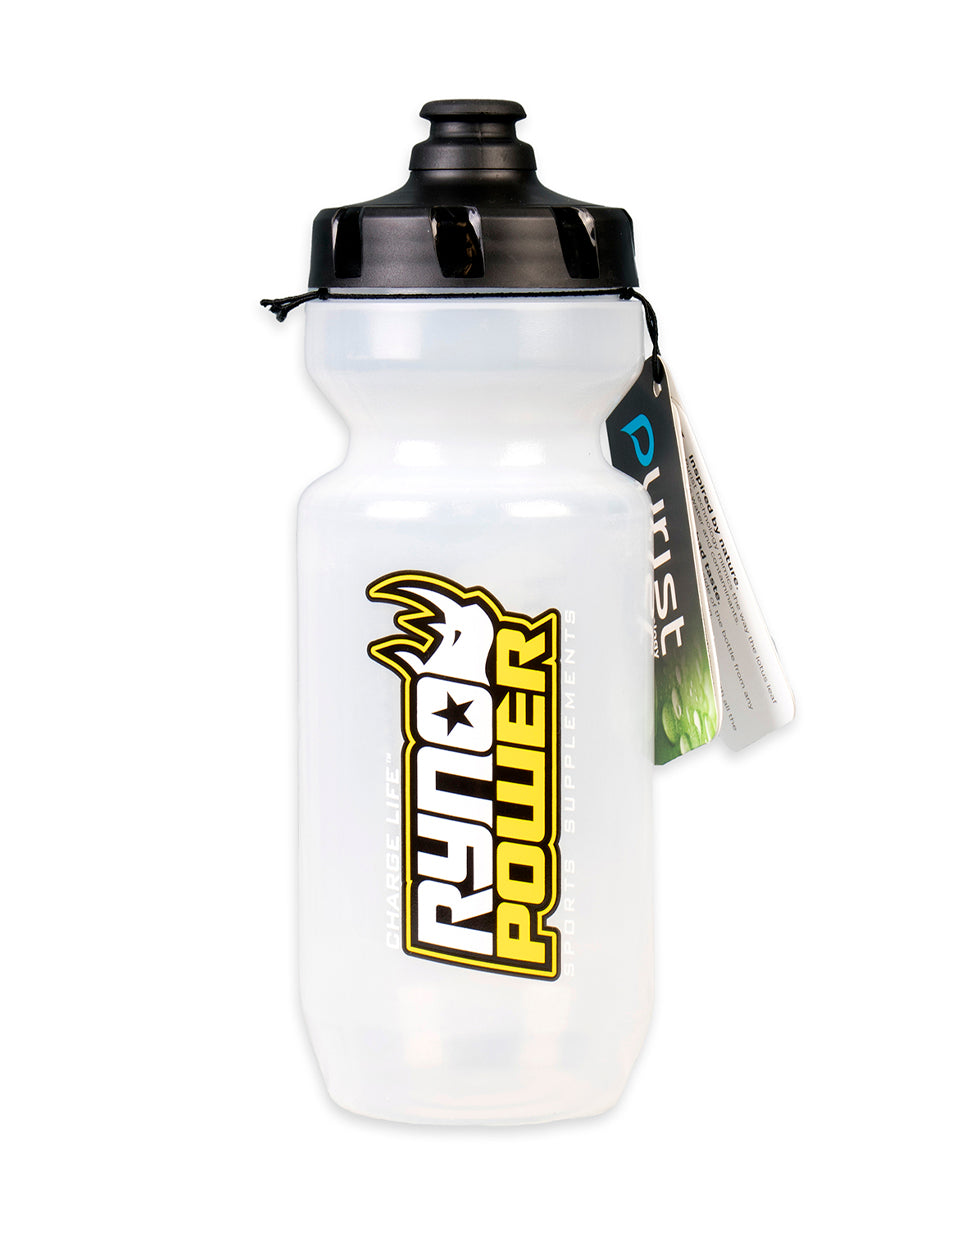 22oz. CLEAR Pro Cycling Bottle - Made by Specialized